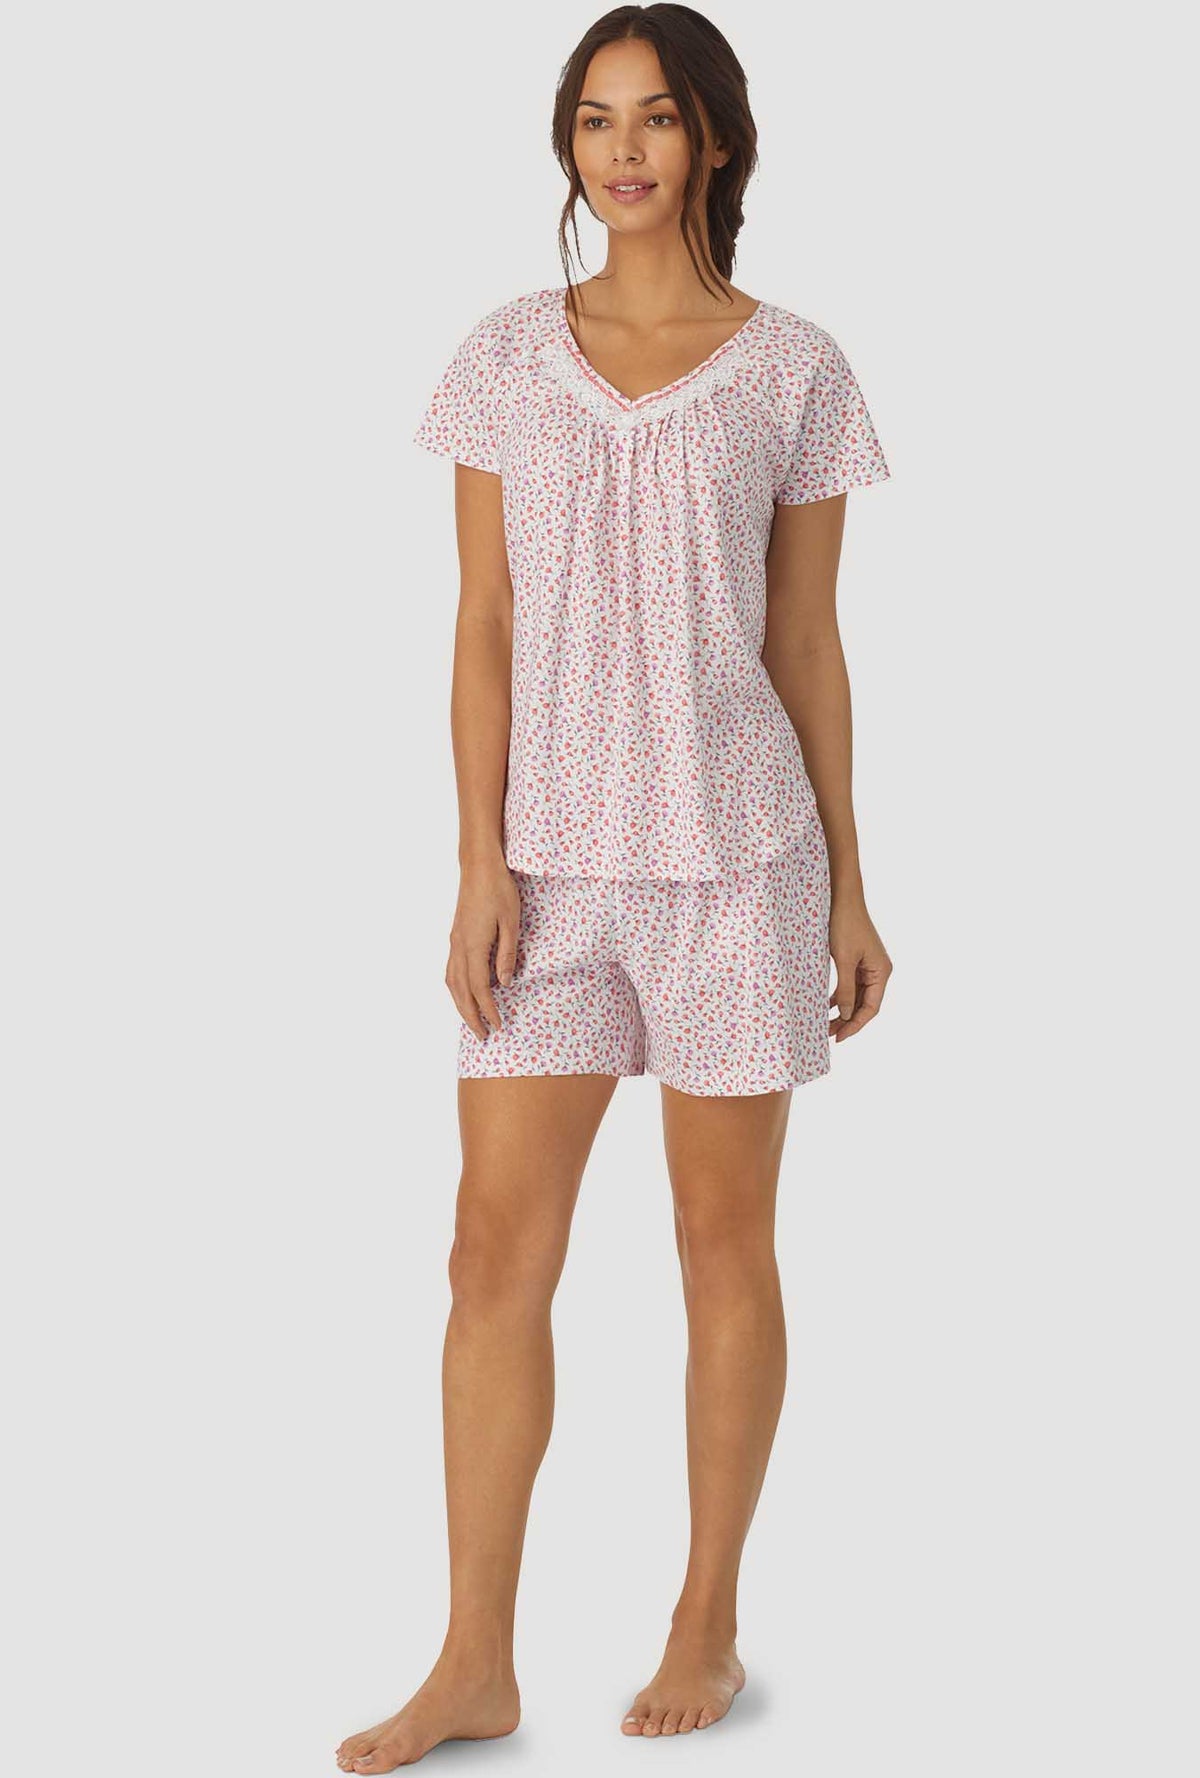 Coral and Lilac Ditsy Foral Cap Sleeve Shortie PJ Set